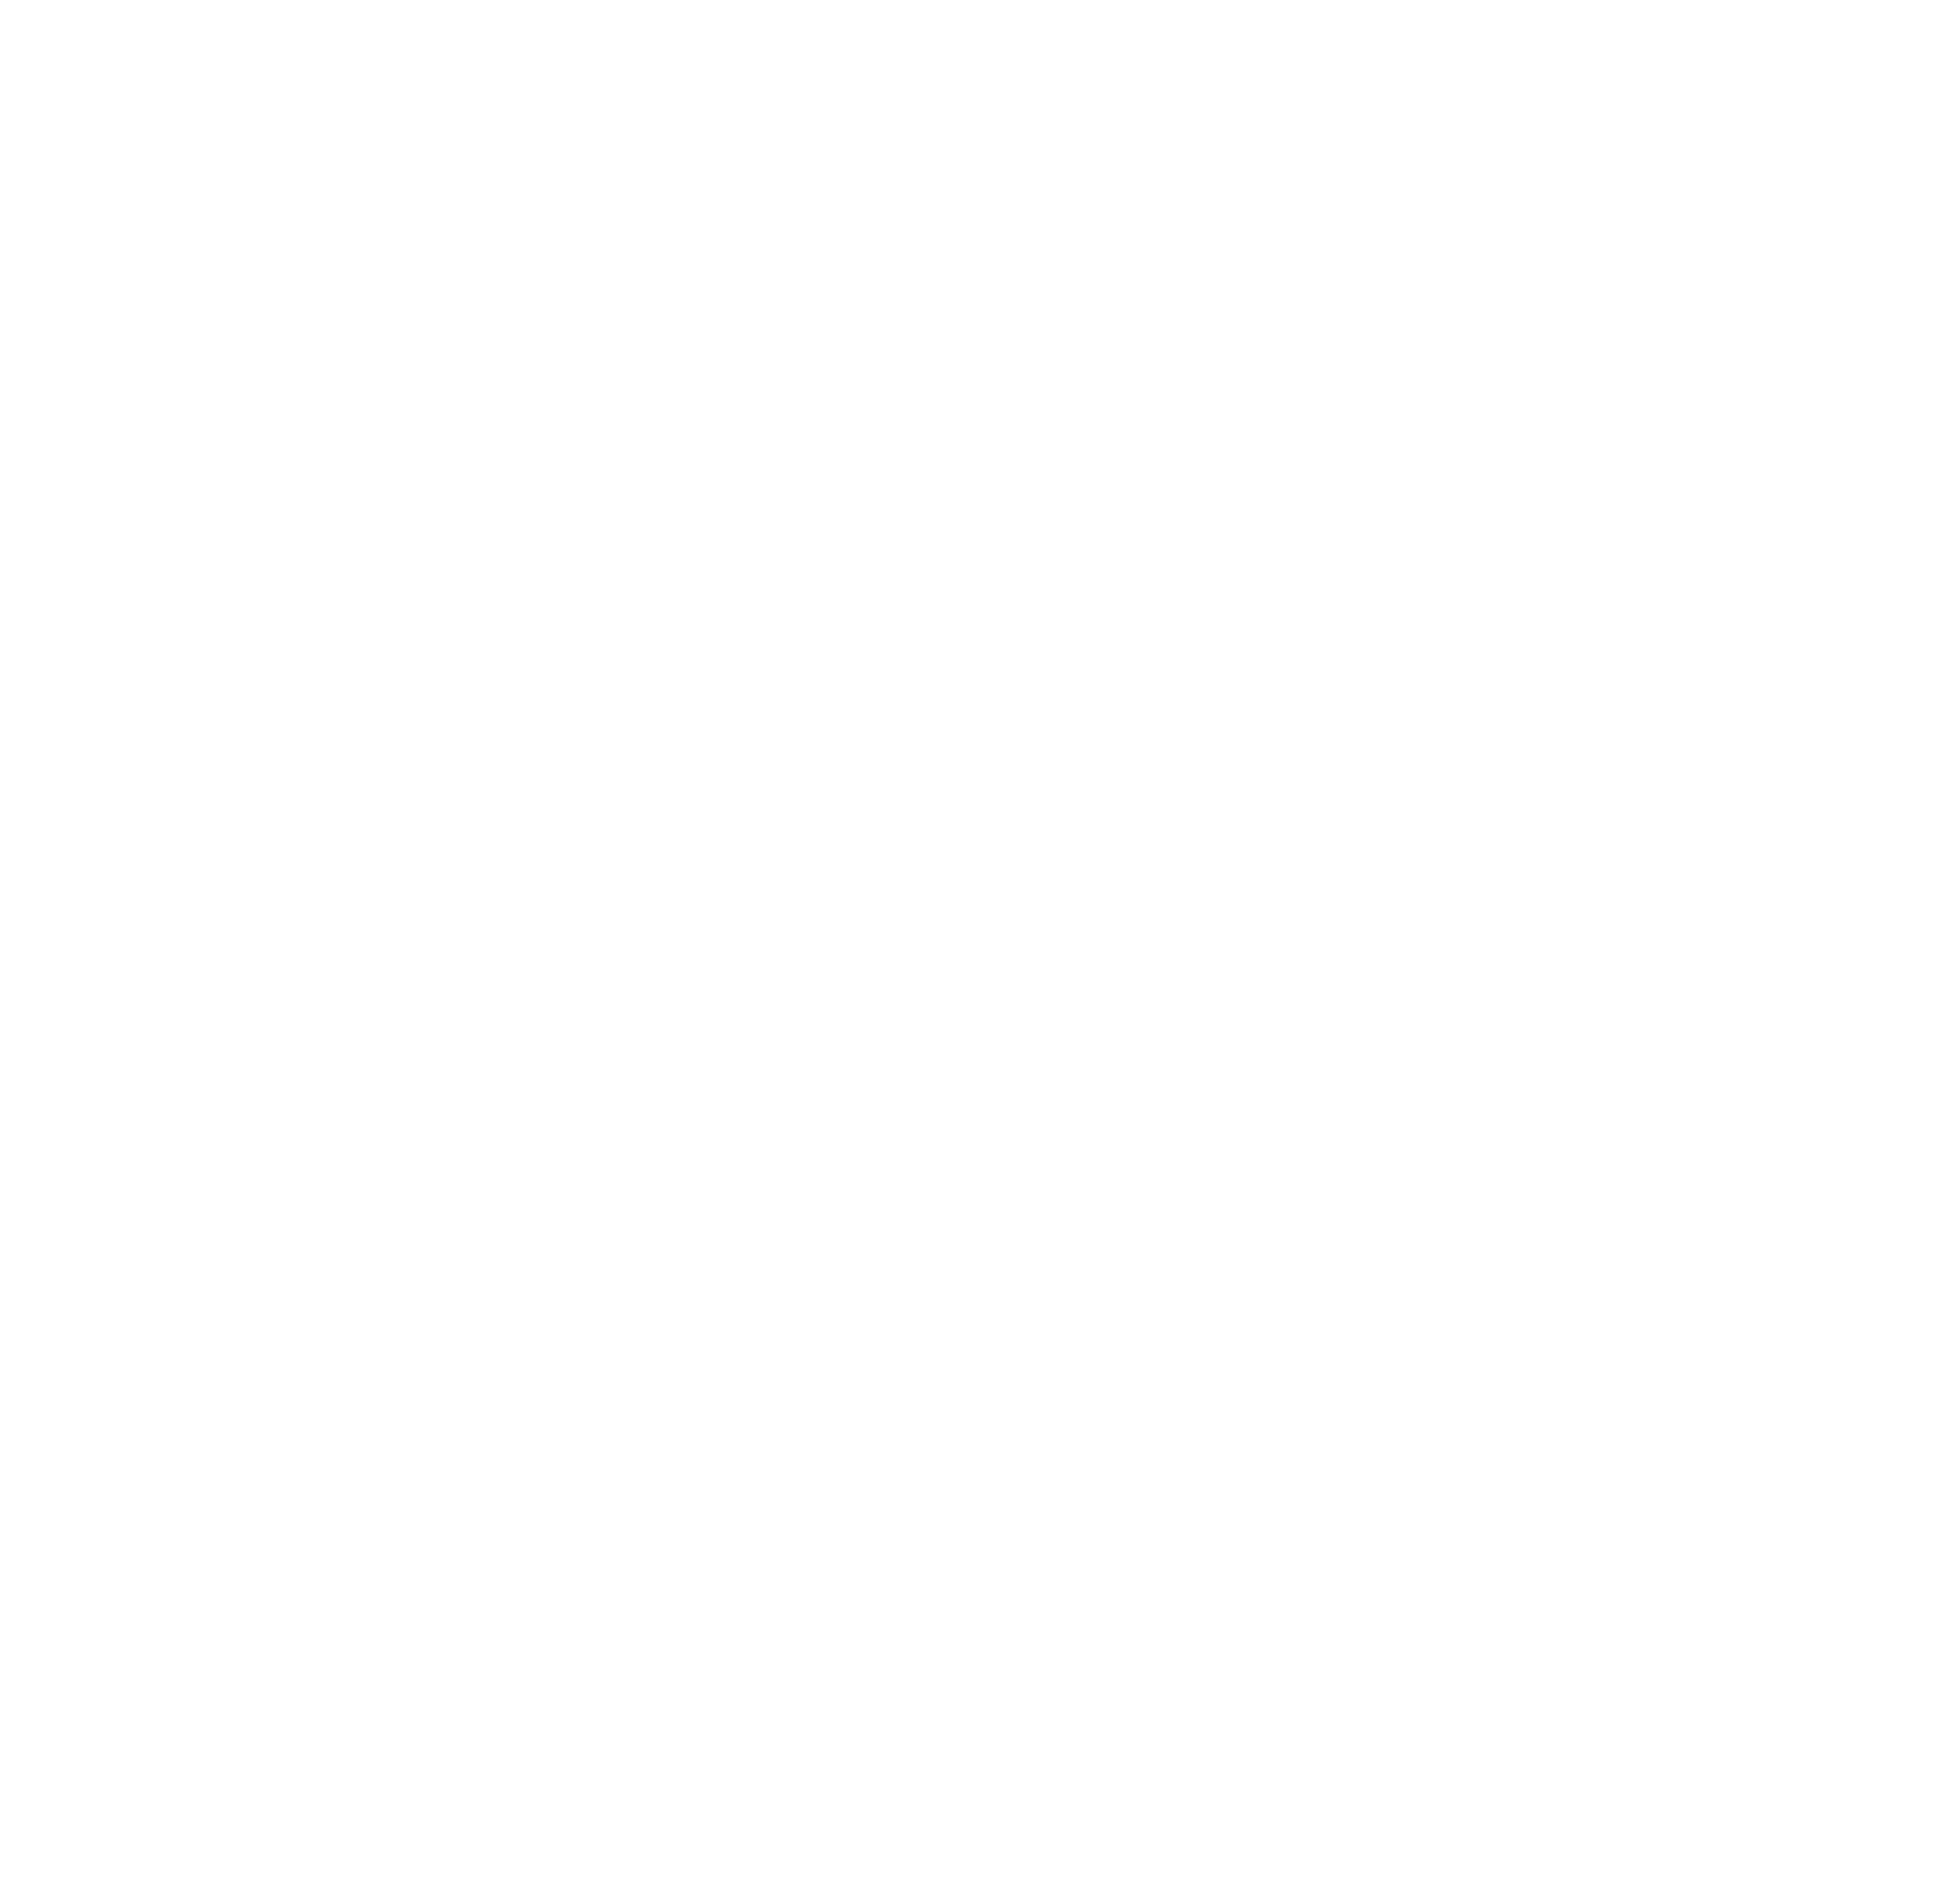 CGM - Solicitors in Southampton, Hampshire